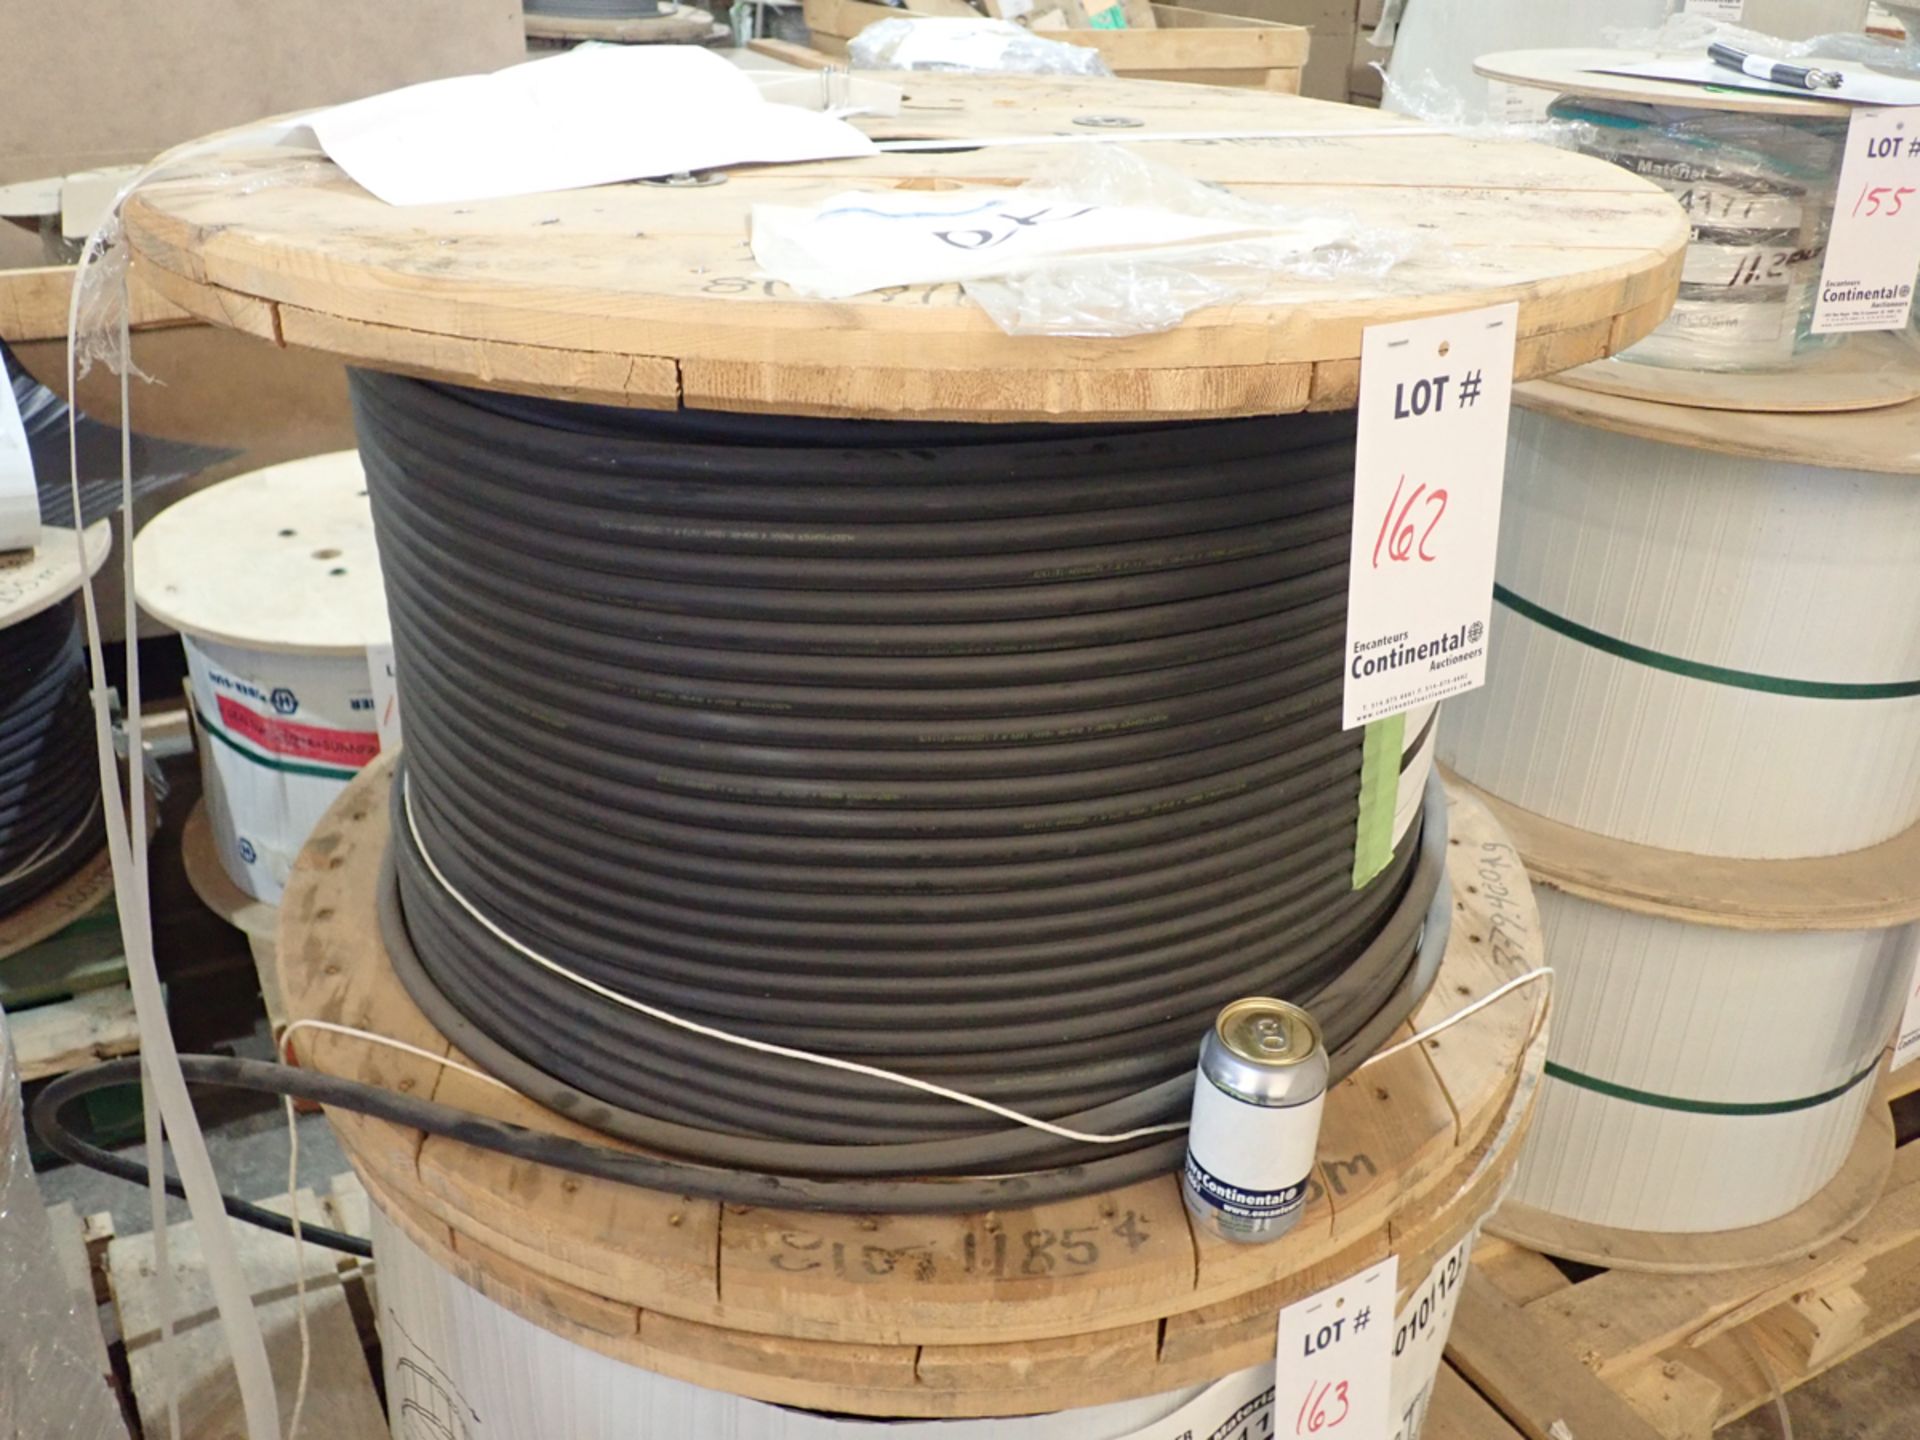 TIN PLATED COPPER CABLE APPROX. LENGTH: 423 METERS, APPROX. WEIGHT: 379 KG